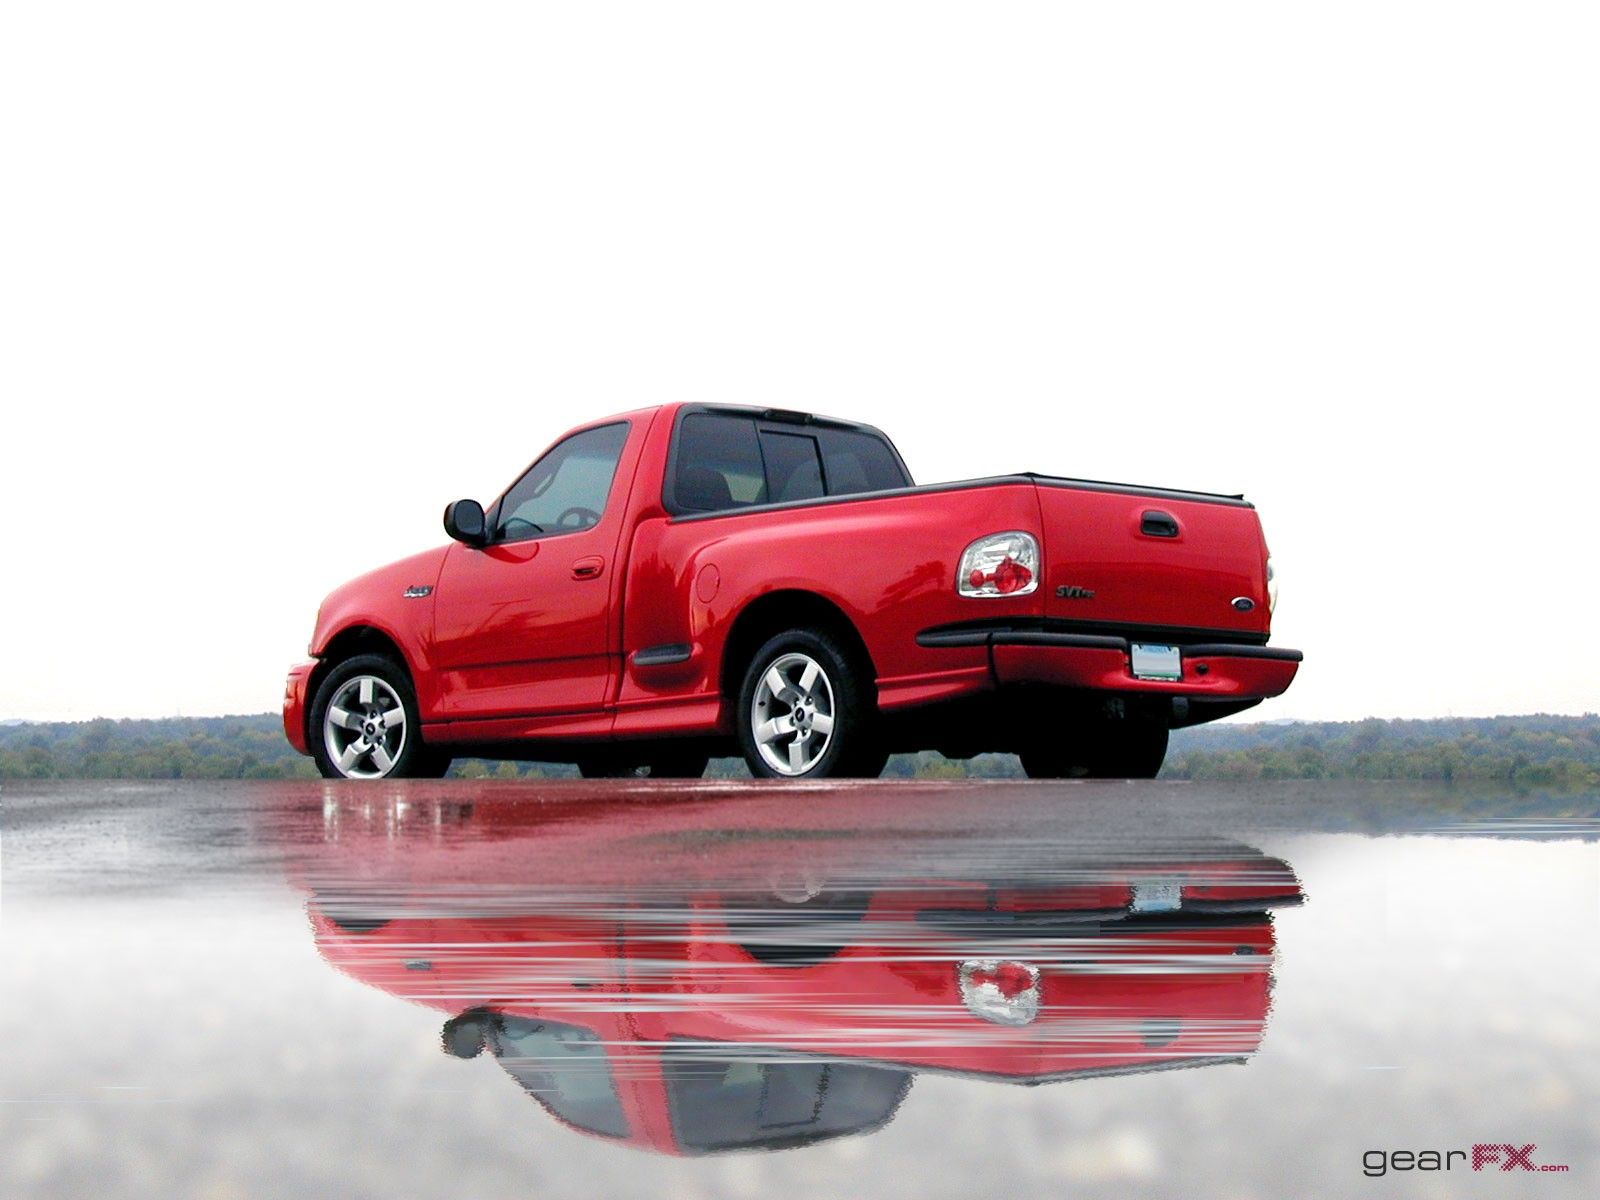 1999 Ford F150 Lightning Wallpaper and Image Gallery